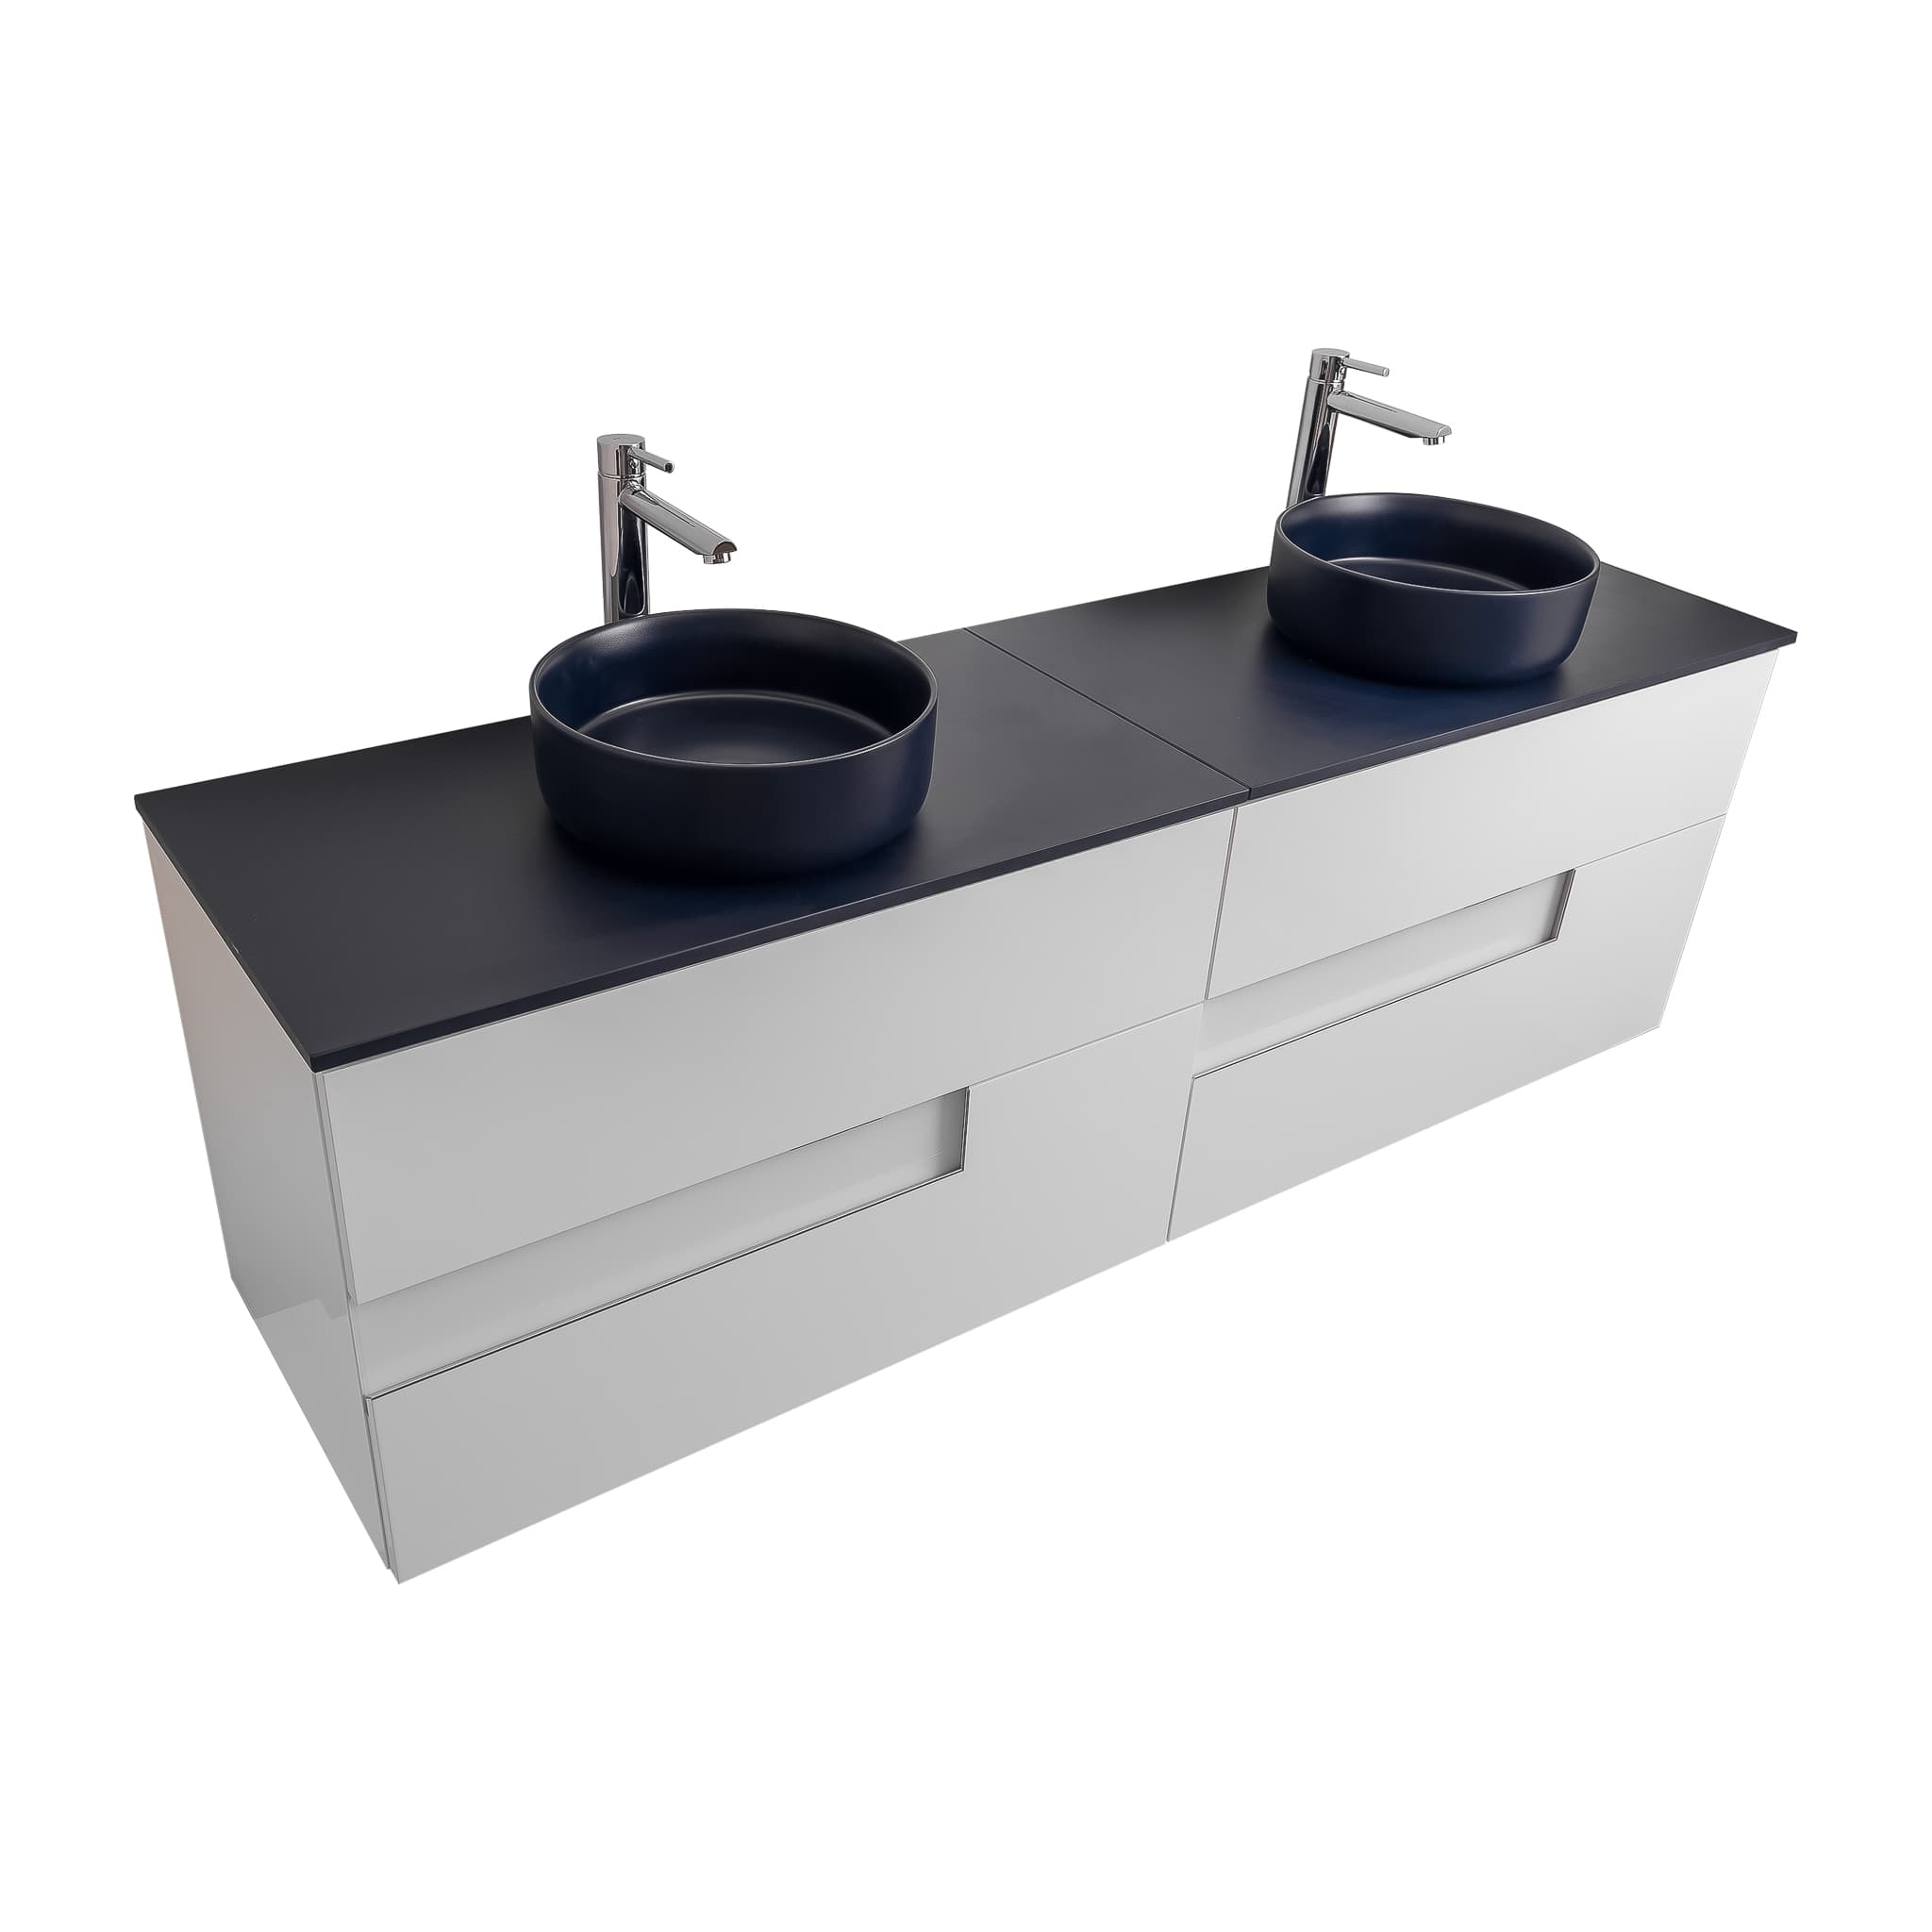 Vision 72 White High Gloss Cabinet, Ares Navy Blue Top And Two Ares Navy Blue Ceramic Basin, Wall Mounted Modern Vanity Set